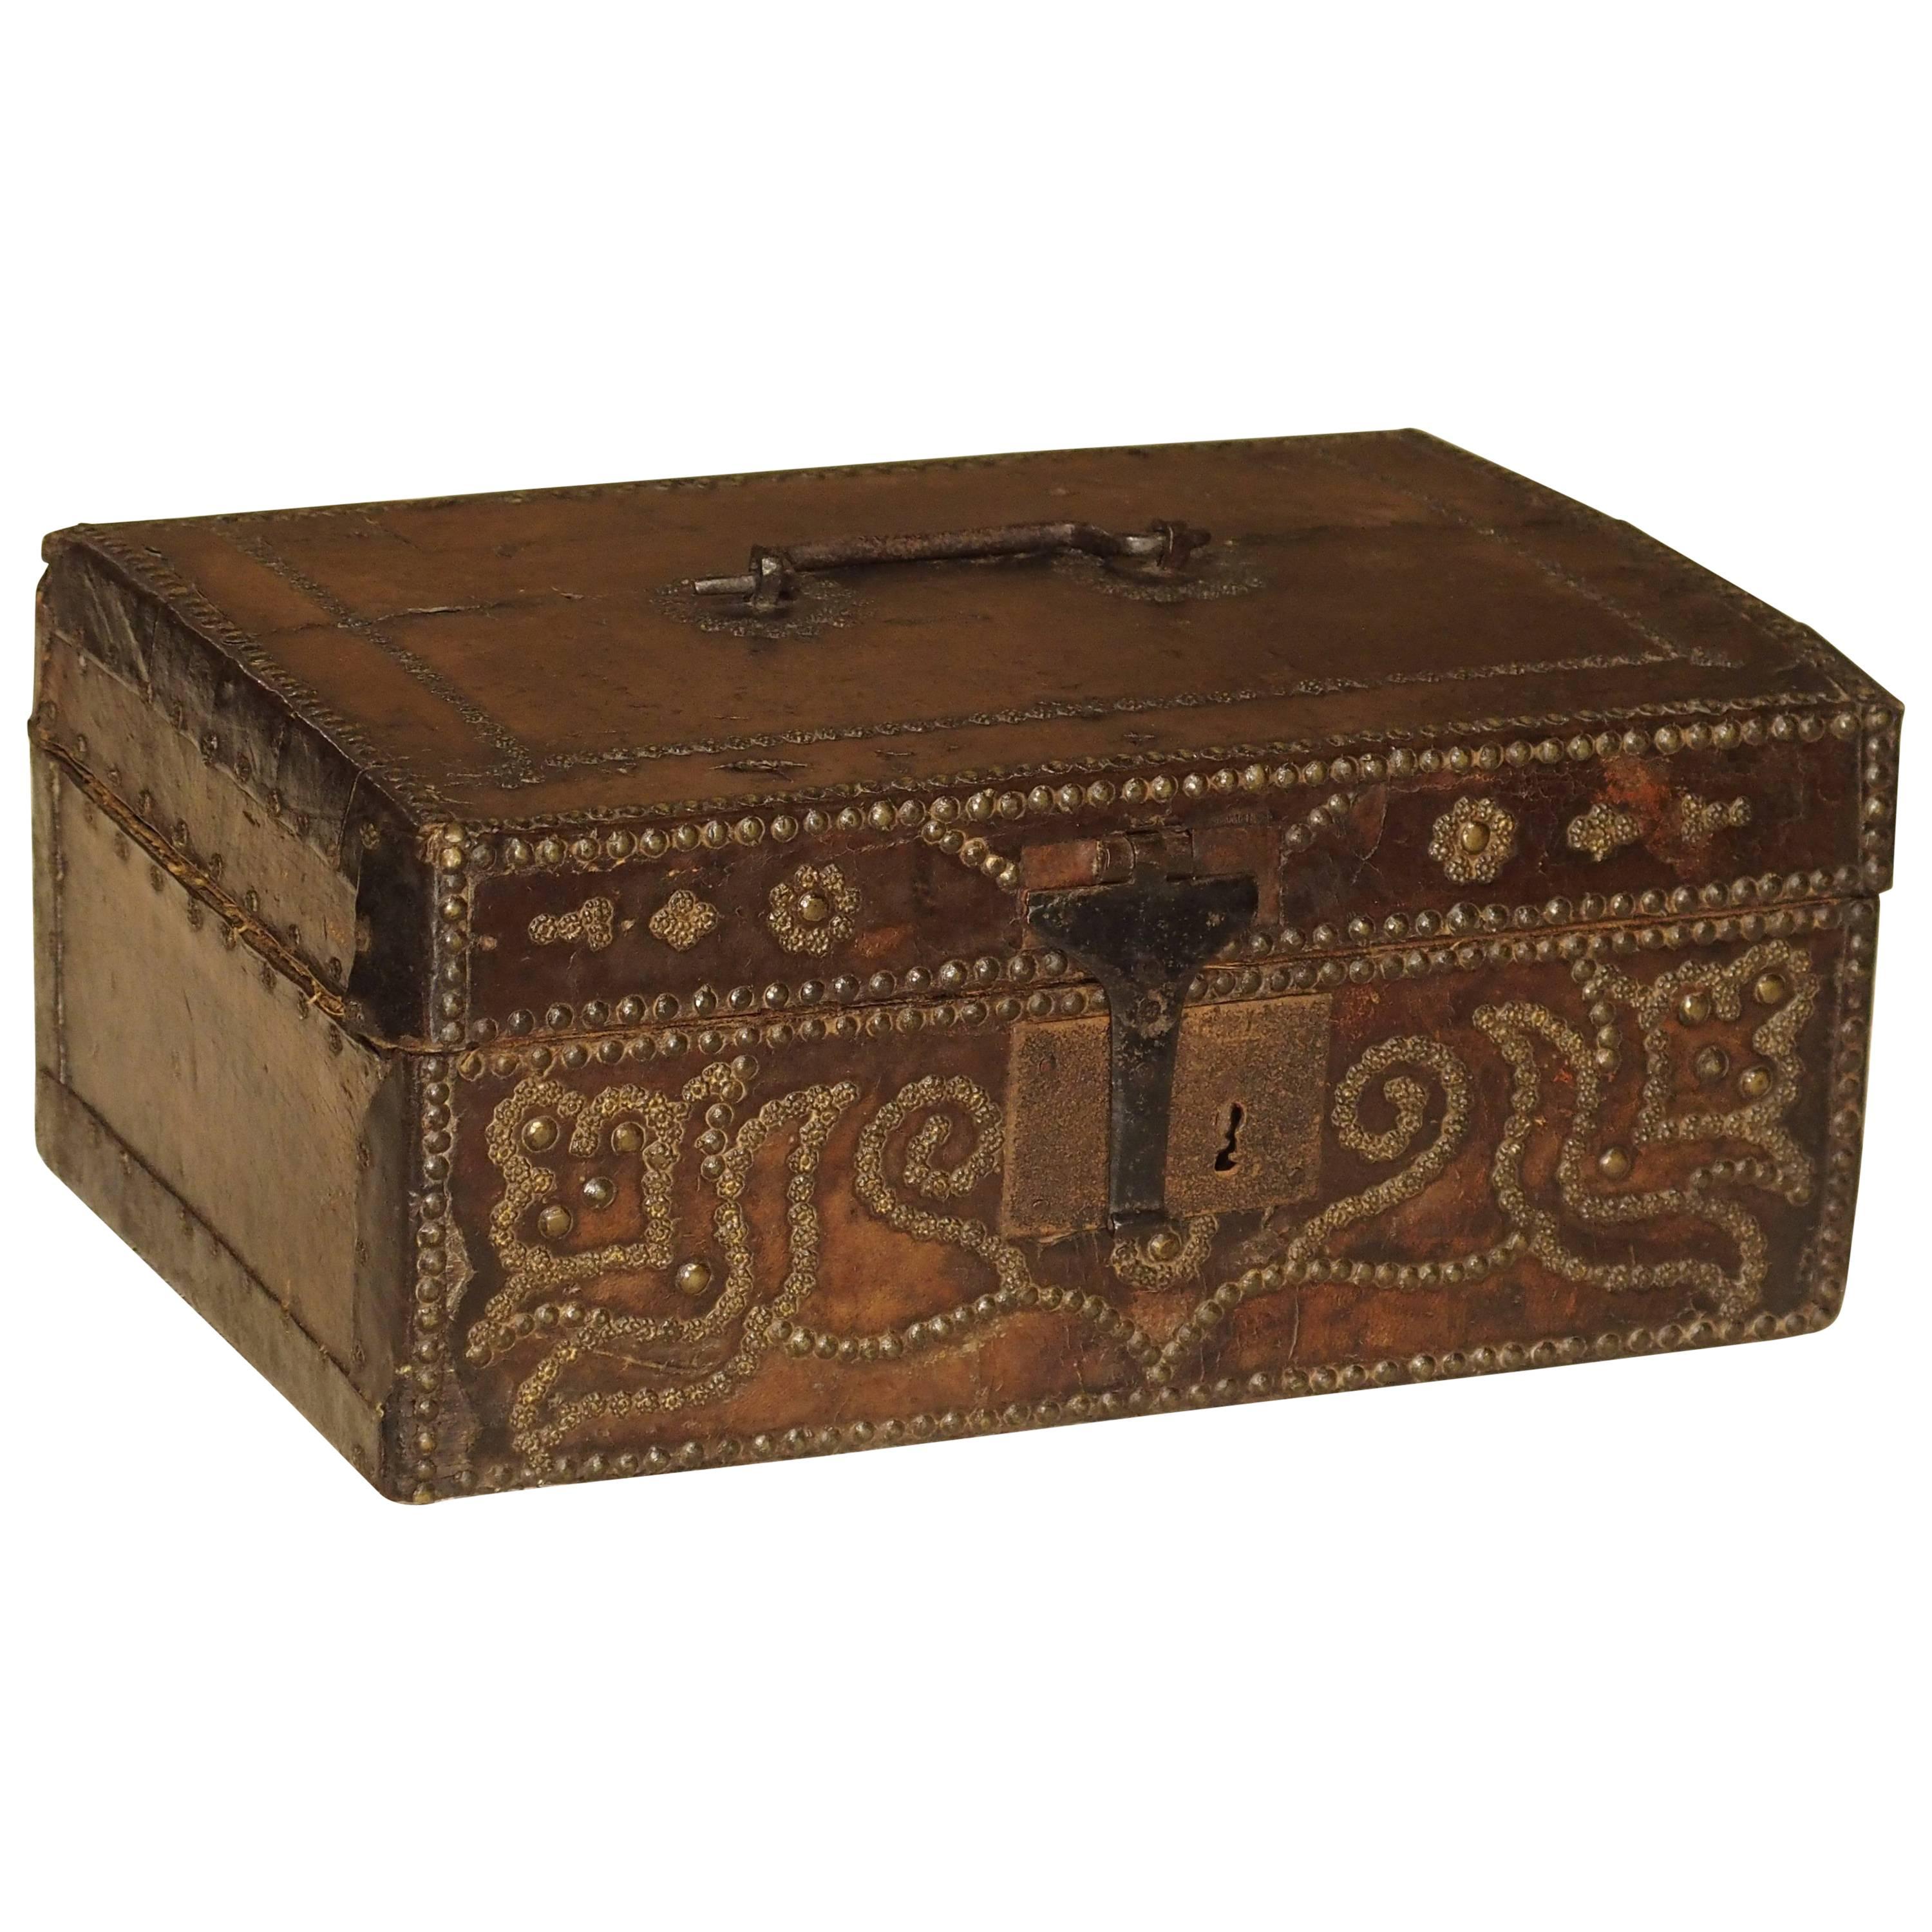 17th Century Studded Leather Box from France